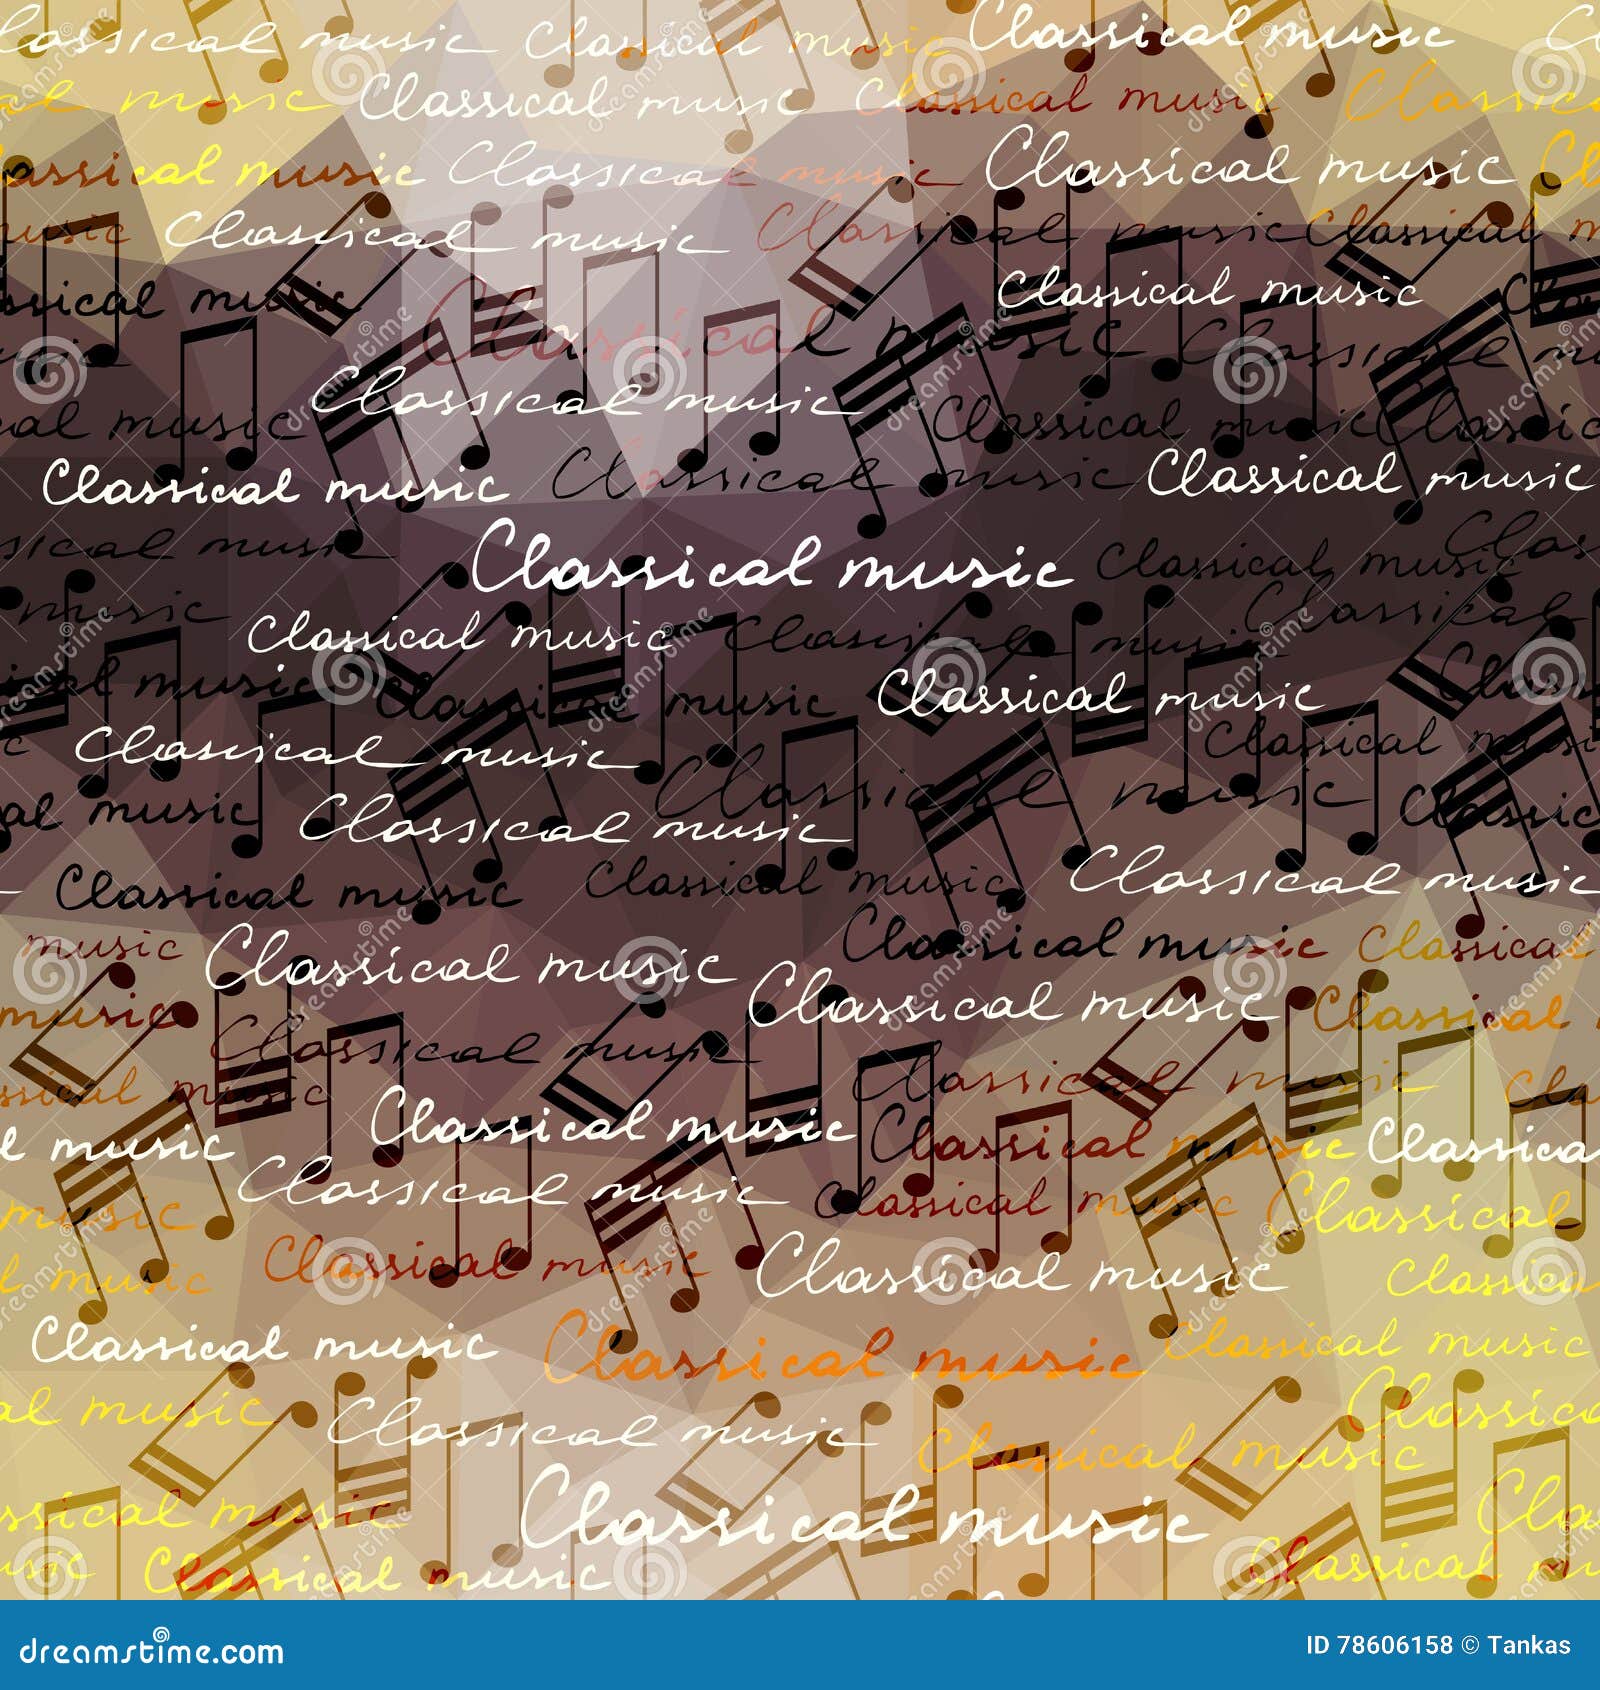 Classical music background stock vector. Illustration of blur - 78606158